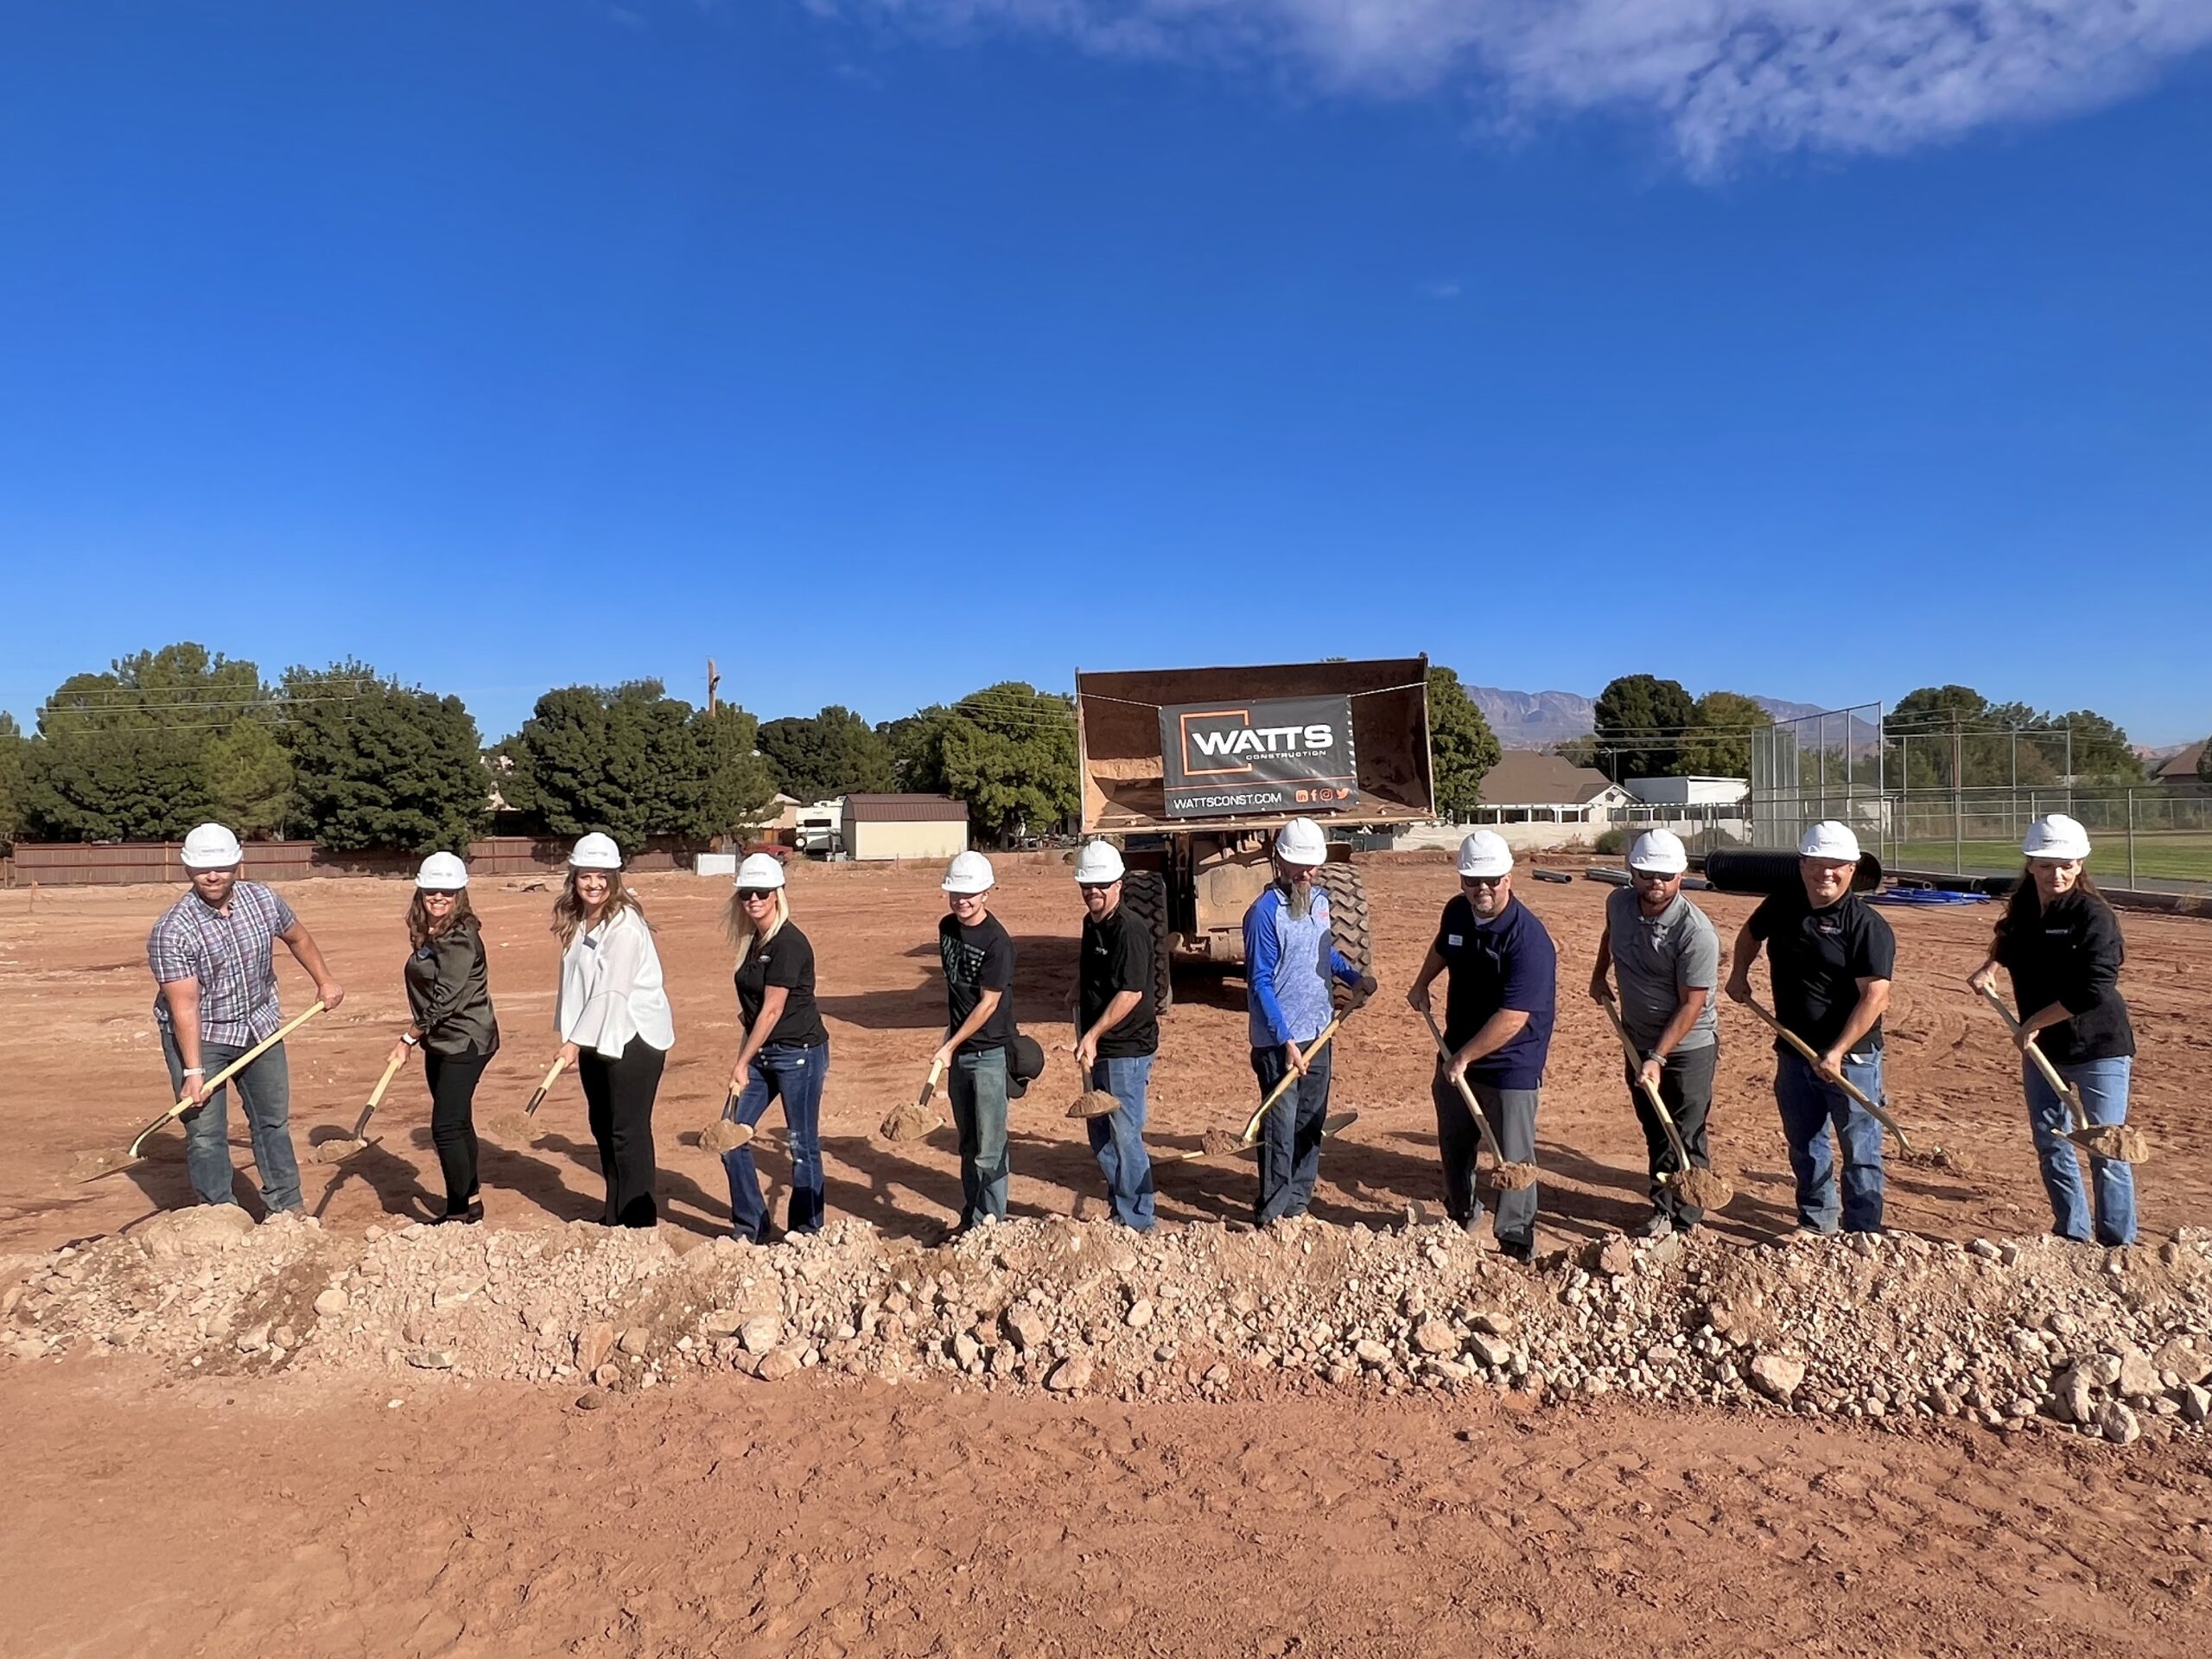 Watts Construction employees pose with gold shovels and turn the dirt